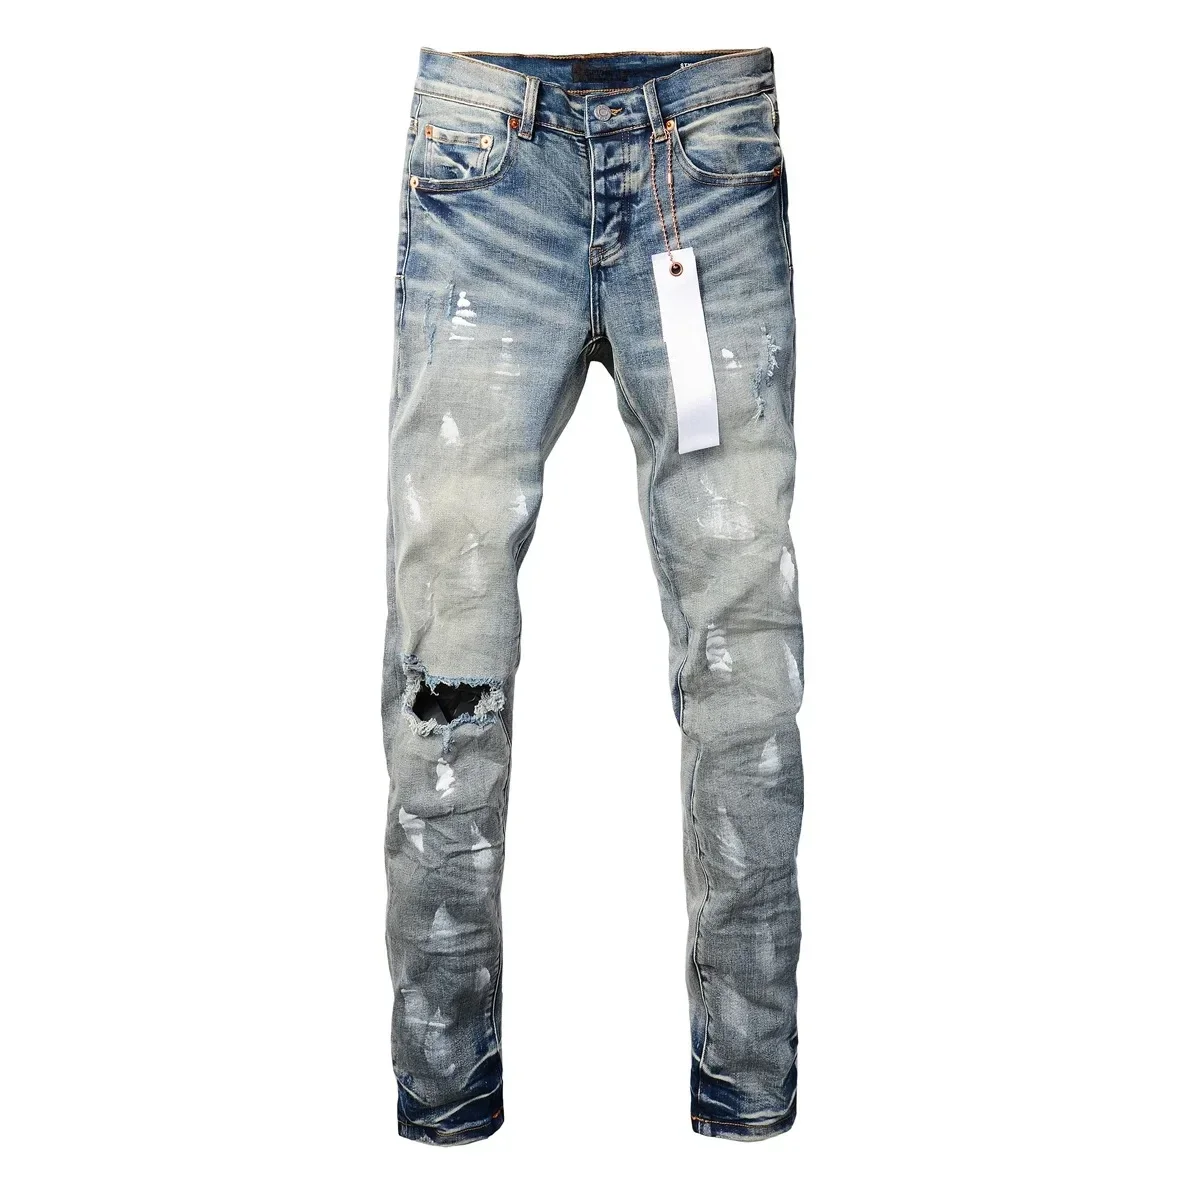 

Purple ROCA Brand jeans with top street paint holes and blue ground white Fashion Repair Low Rise Skinny Denim pants